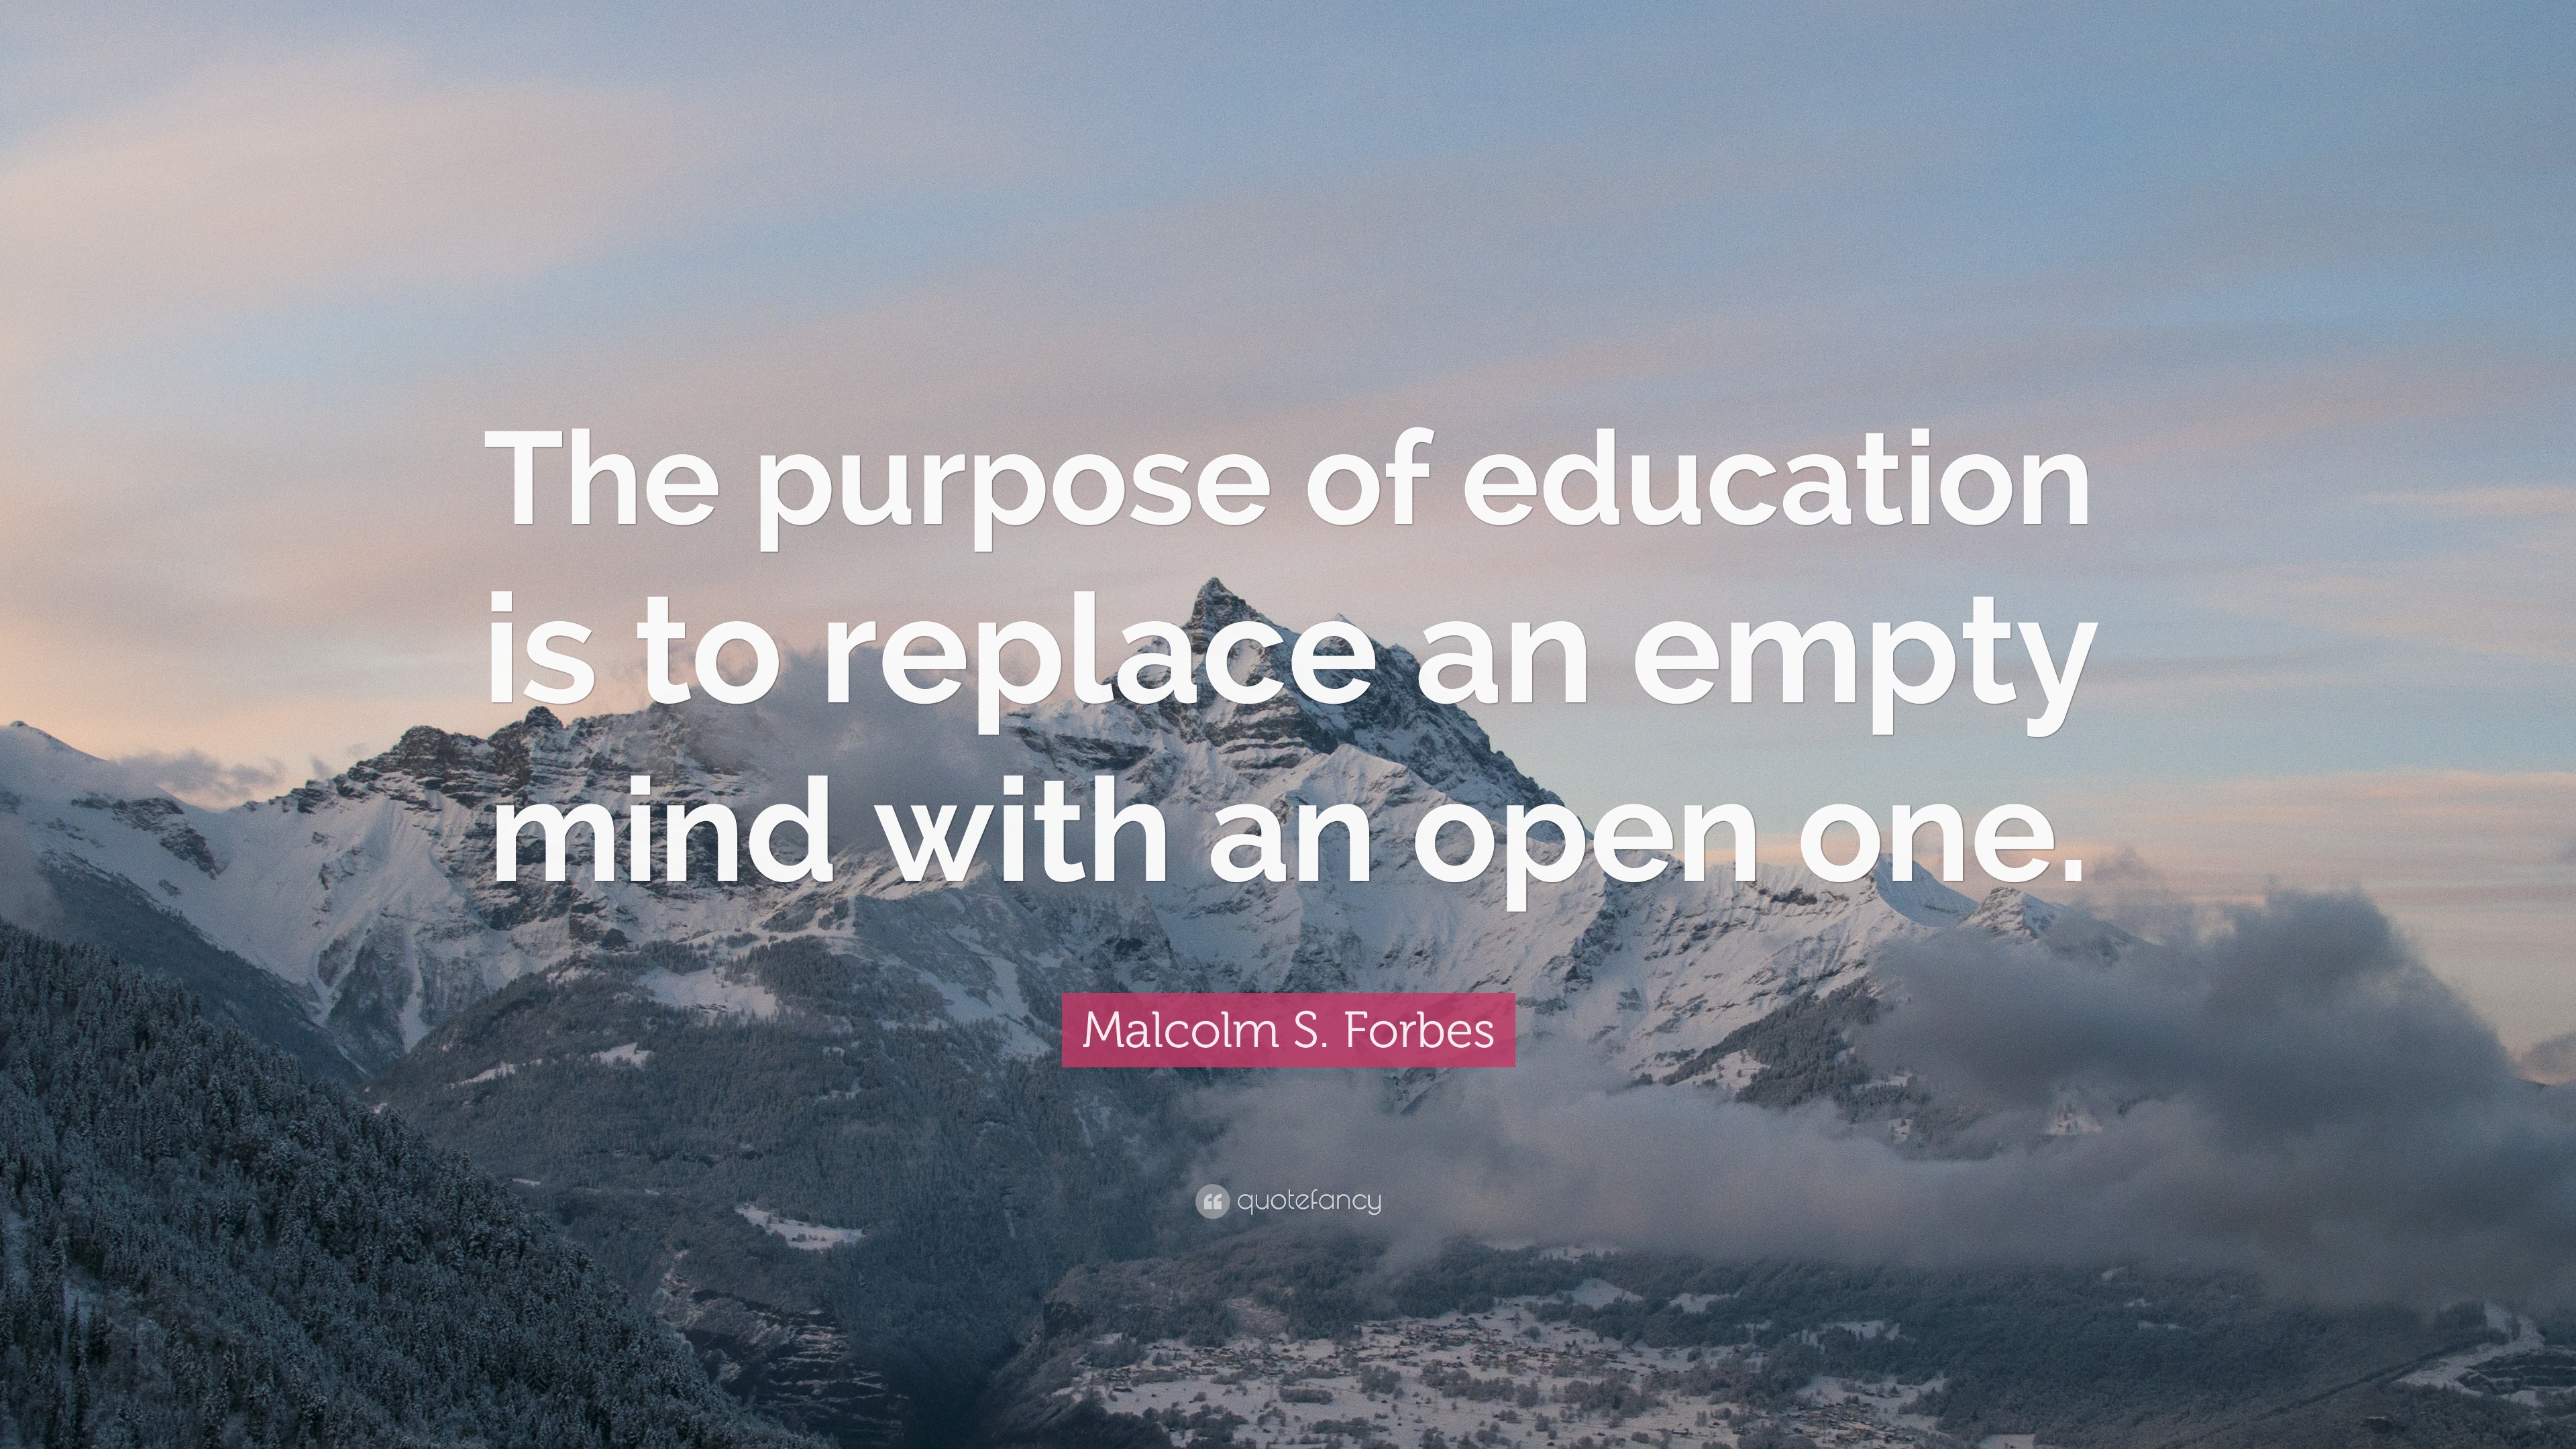 The purpose of education is to replace an empty mind with open one